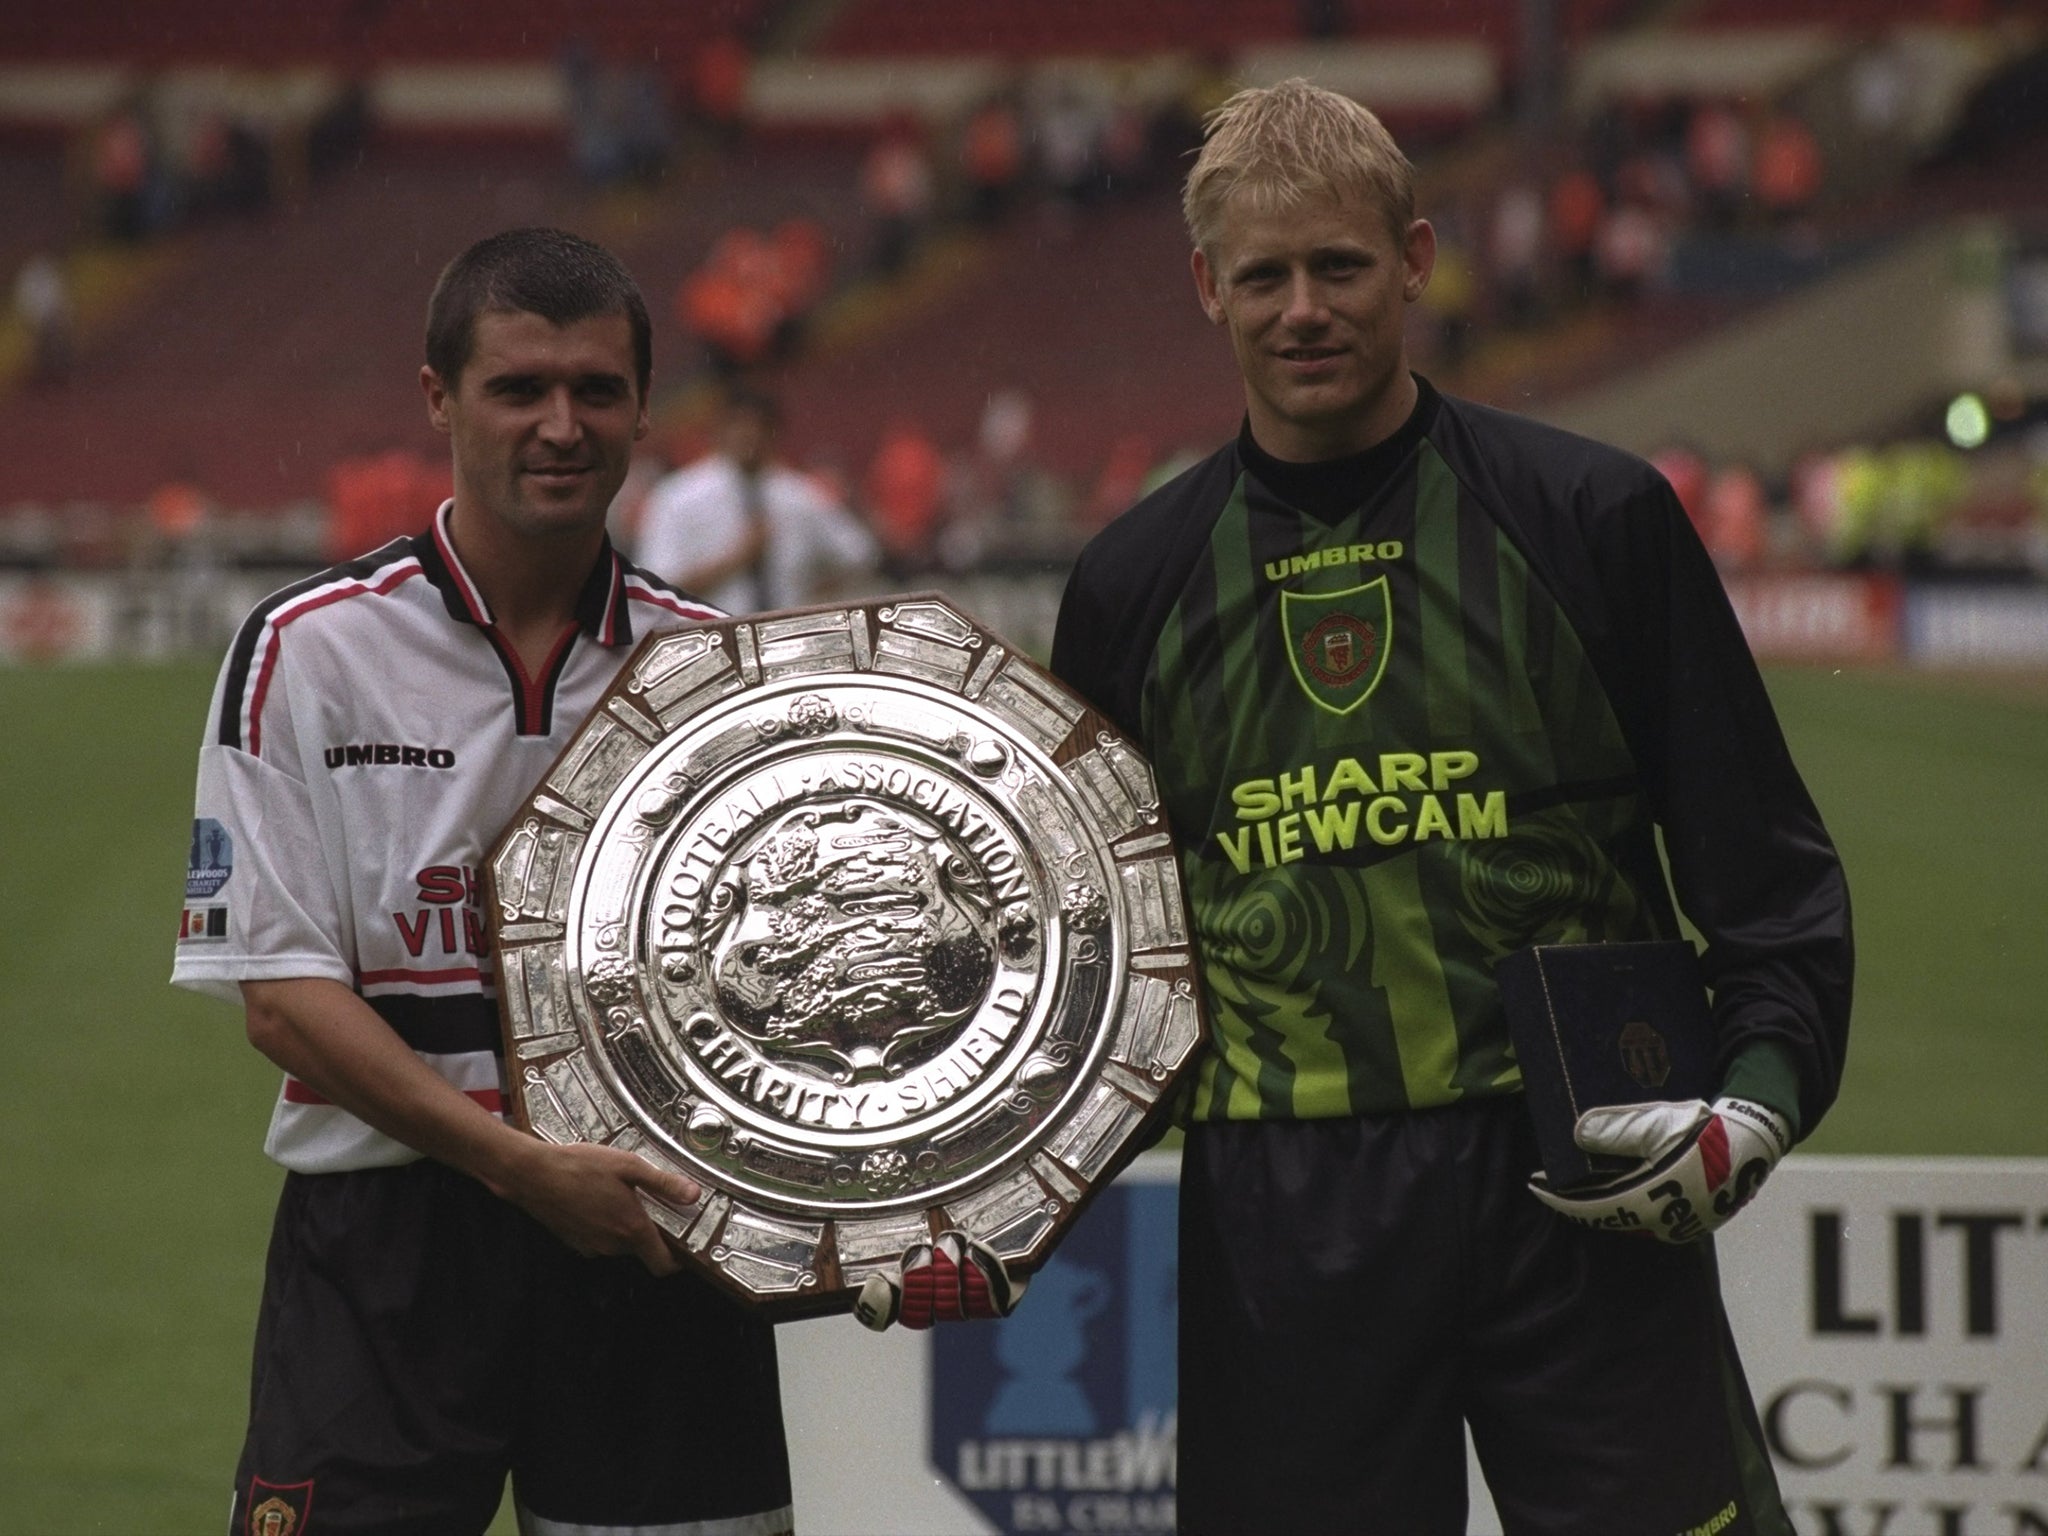 Roy Keane and Peter Schmeichel - world class or not?